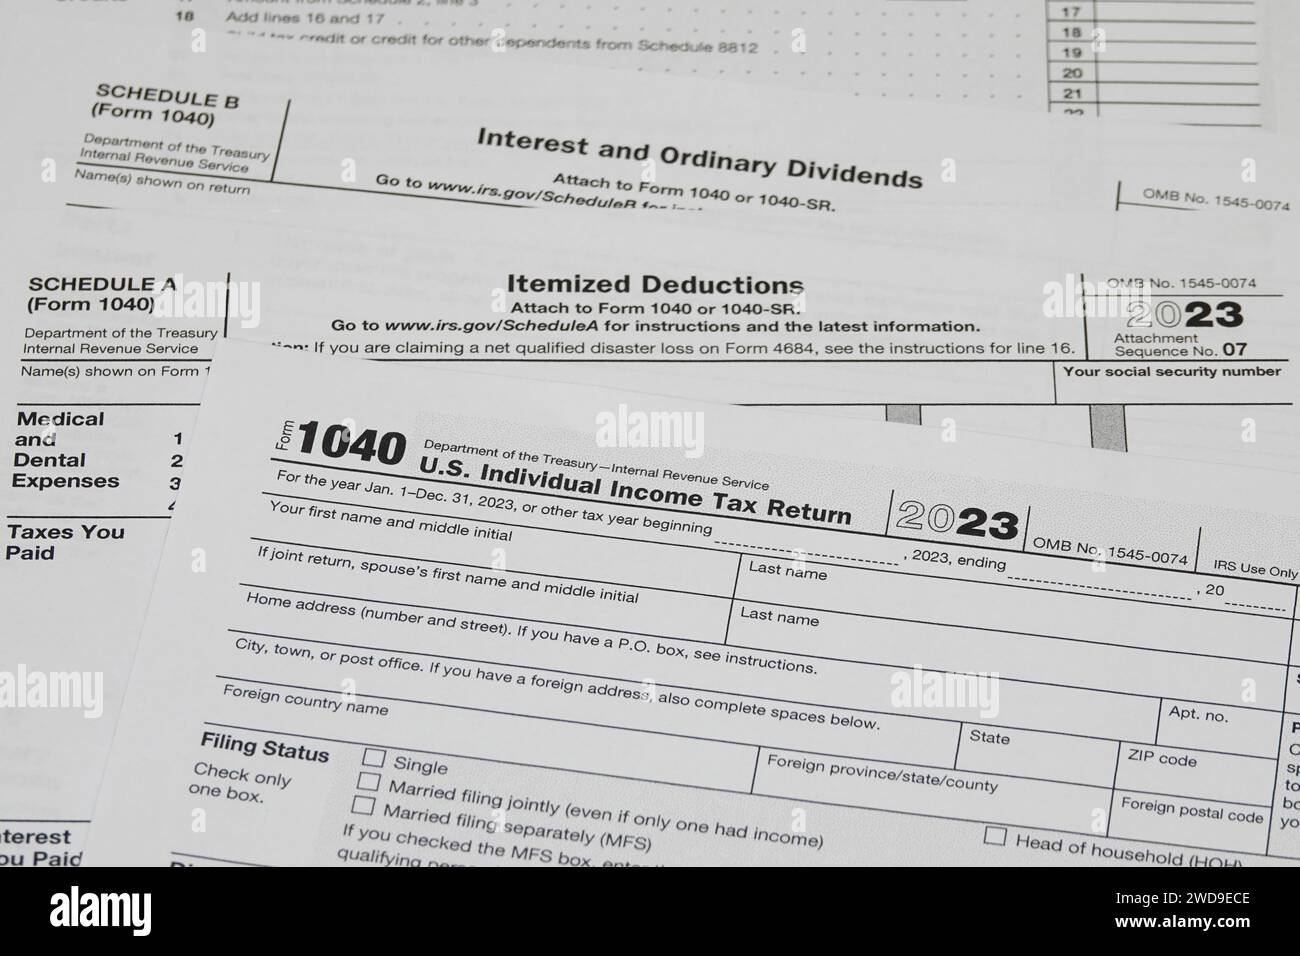 In 2024, for tax year 2023, a printed IRS 1040 tax form is shown, along with Schedule A and Schedule B forms. Stock Photo